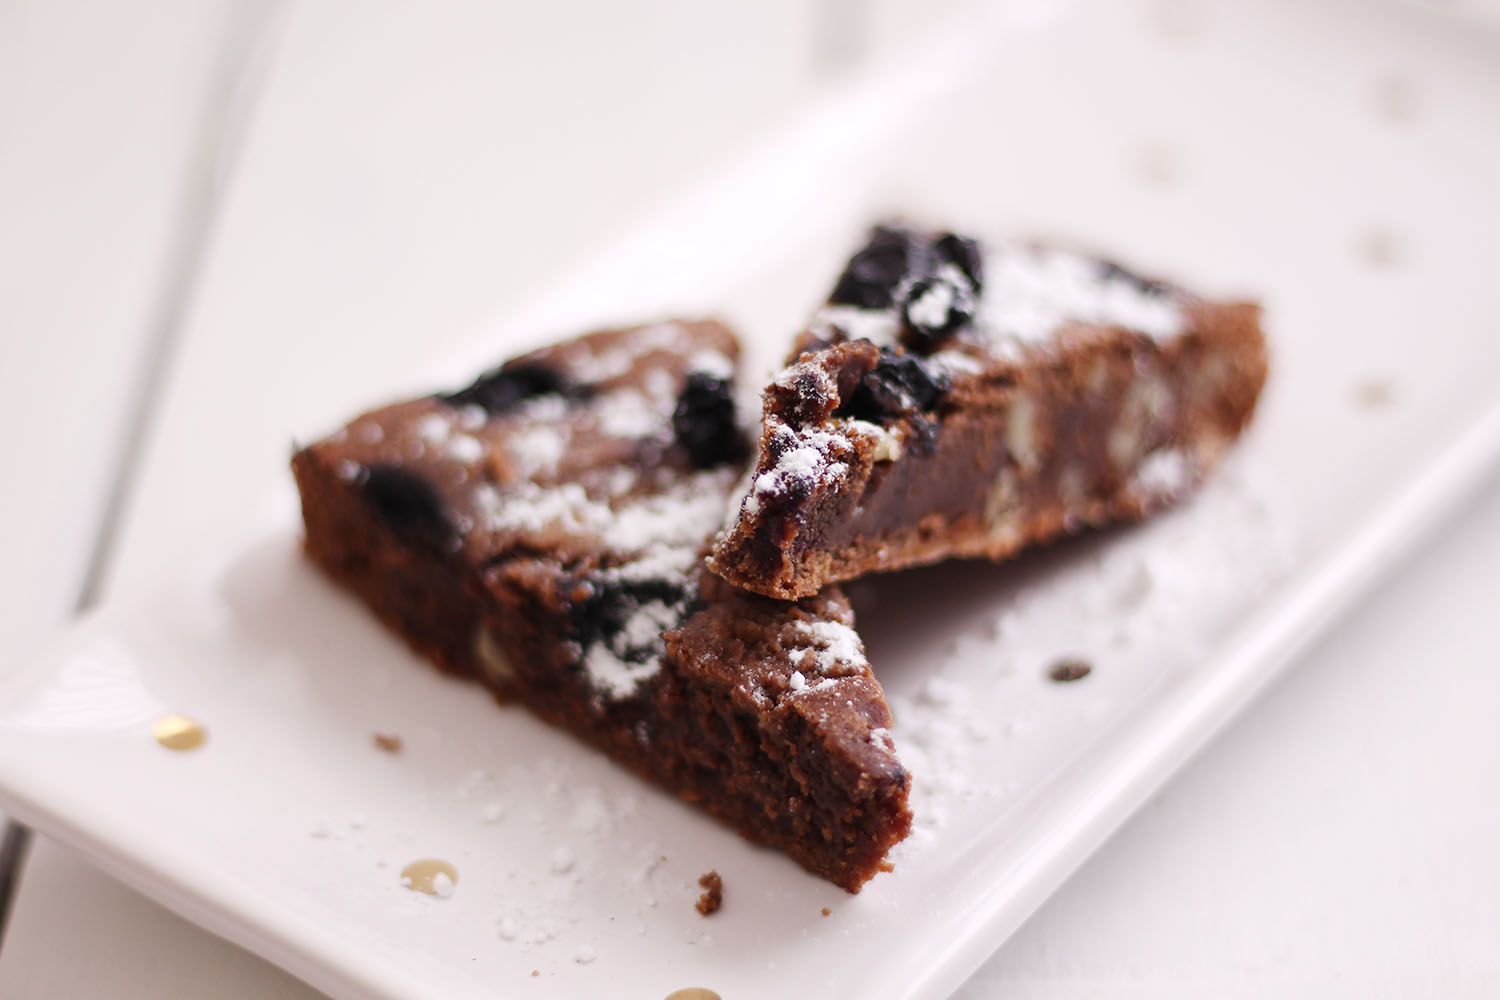 Big fan of brownie? This blueberry and walnut brownie will win any crowd over.